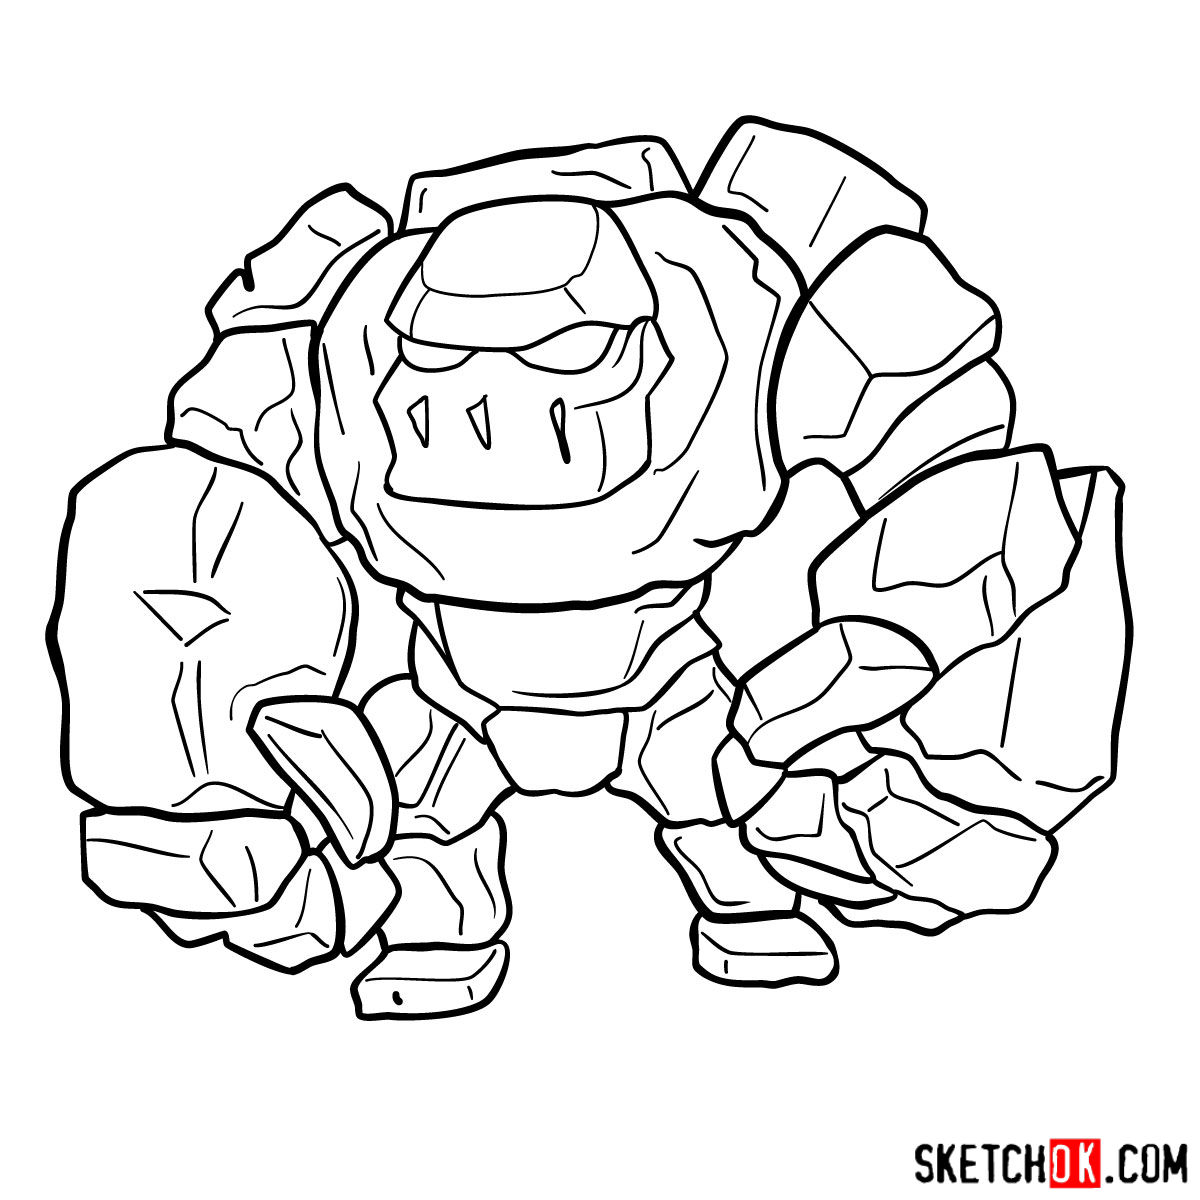 How to draw Golem (Golemite) from Clash of Clans - step 11